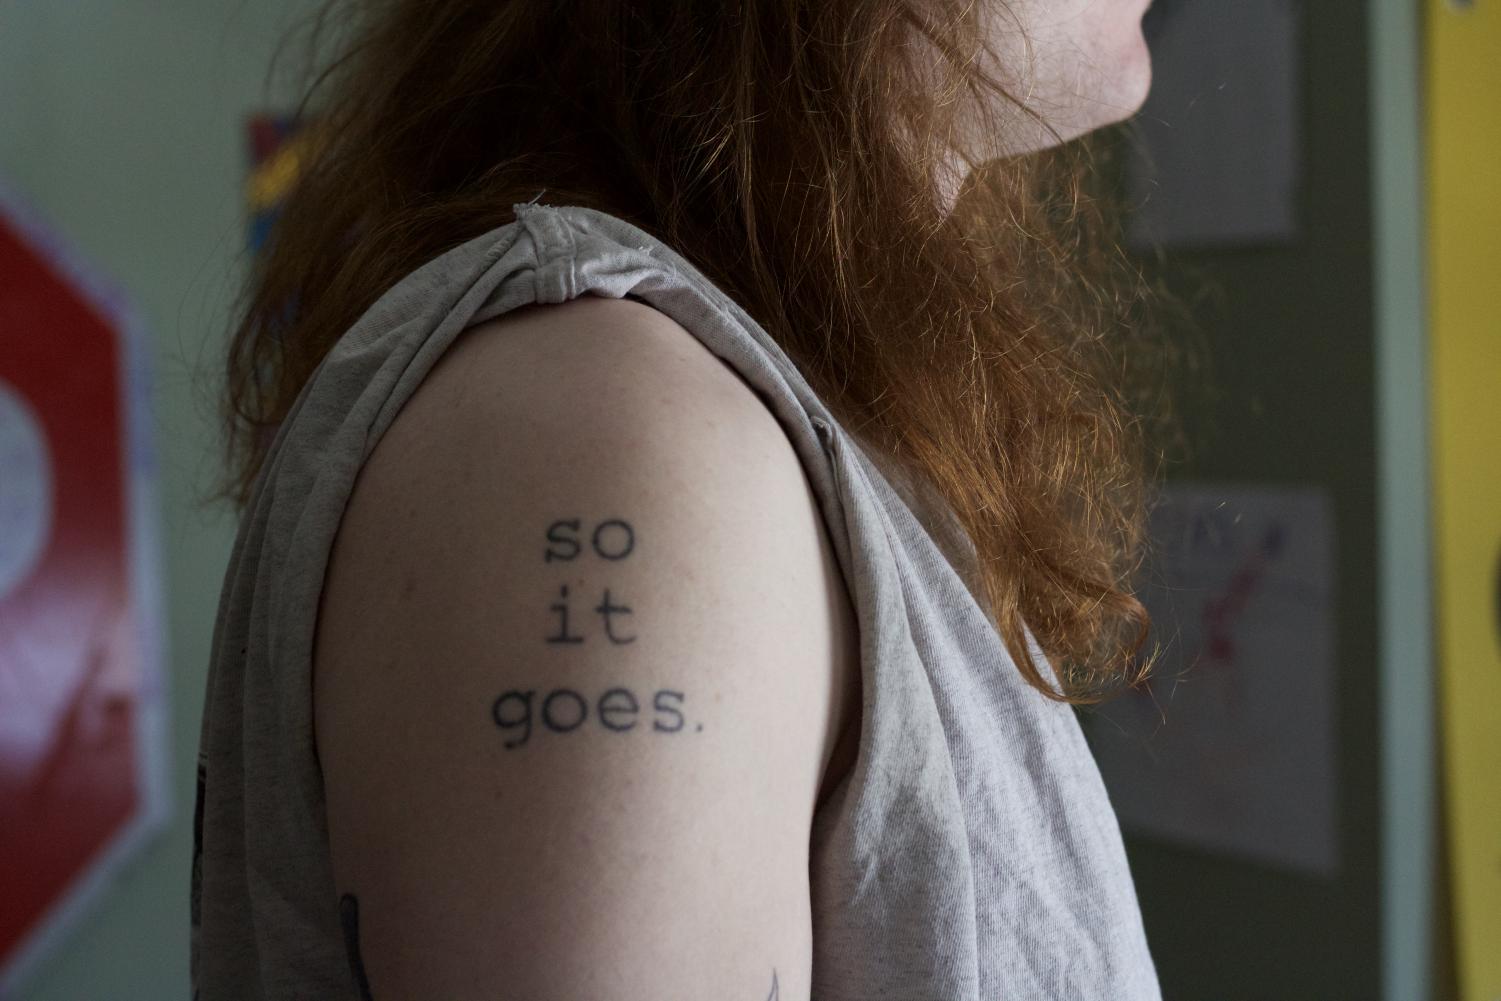 No Ragrets: Love for Unconventional Tattoos – The Vermont Cynic